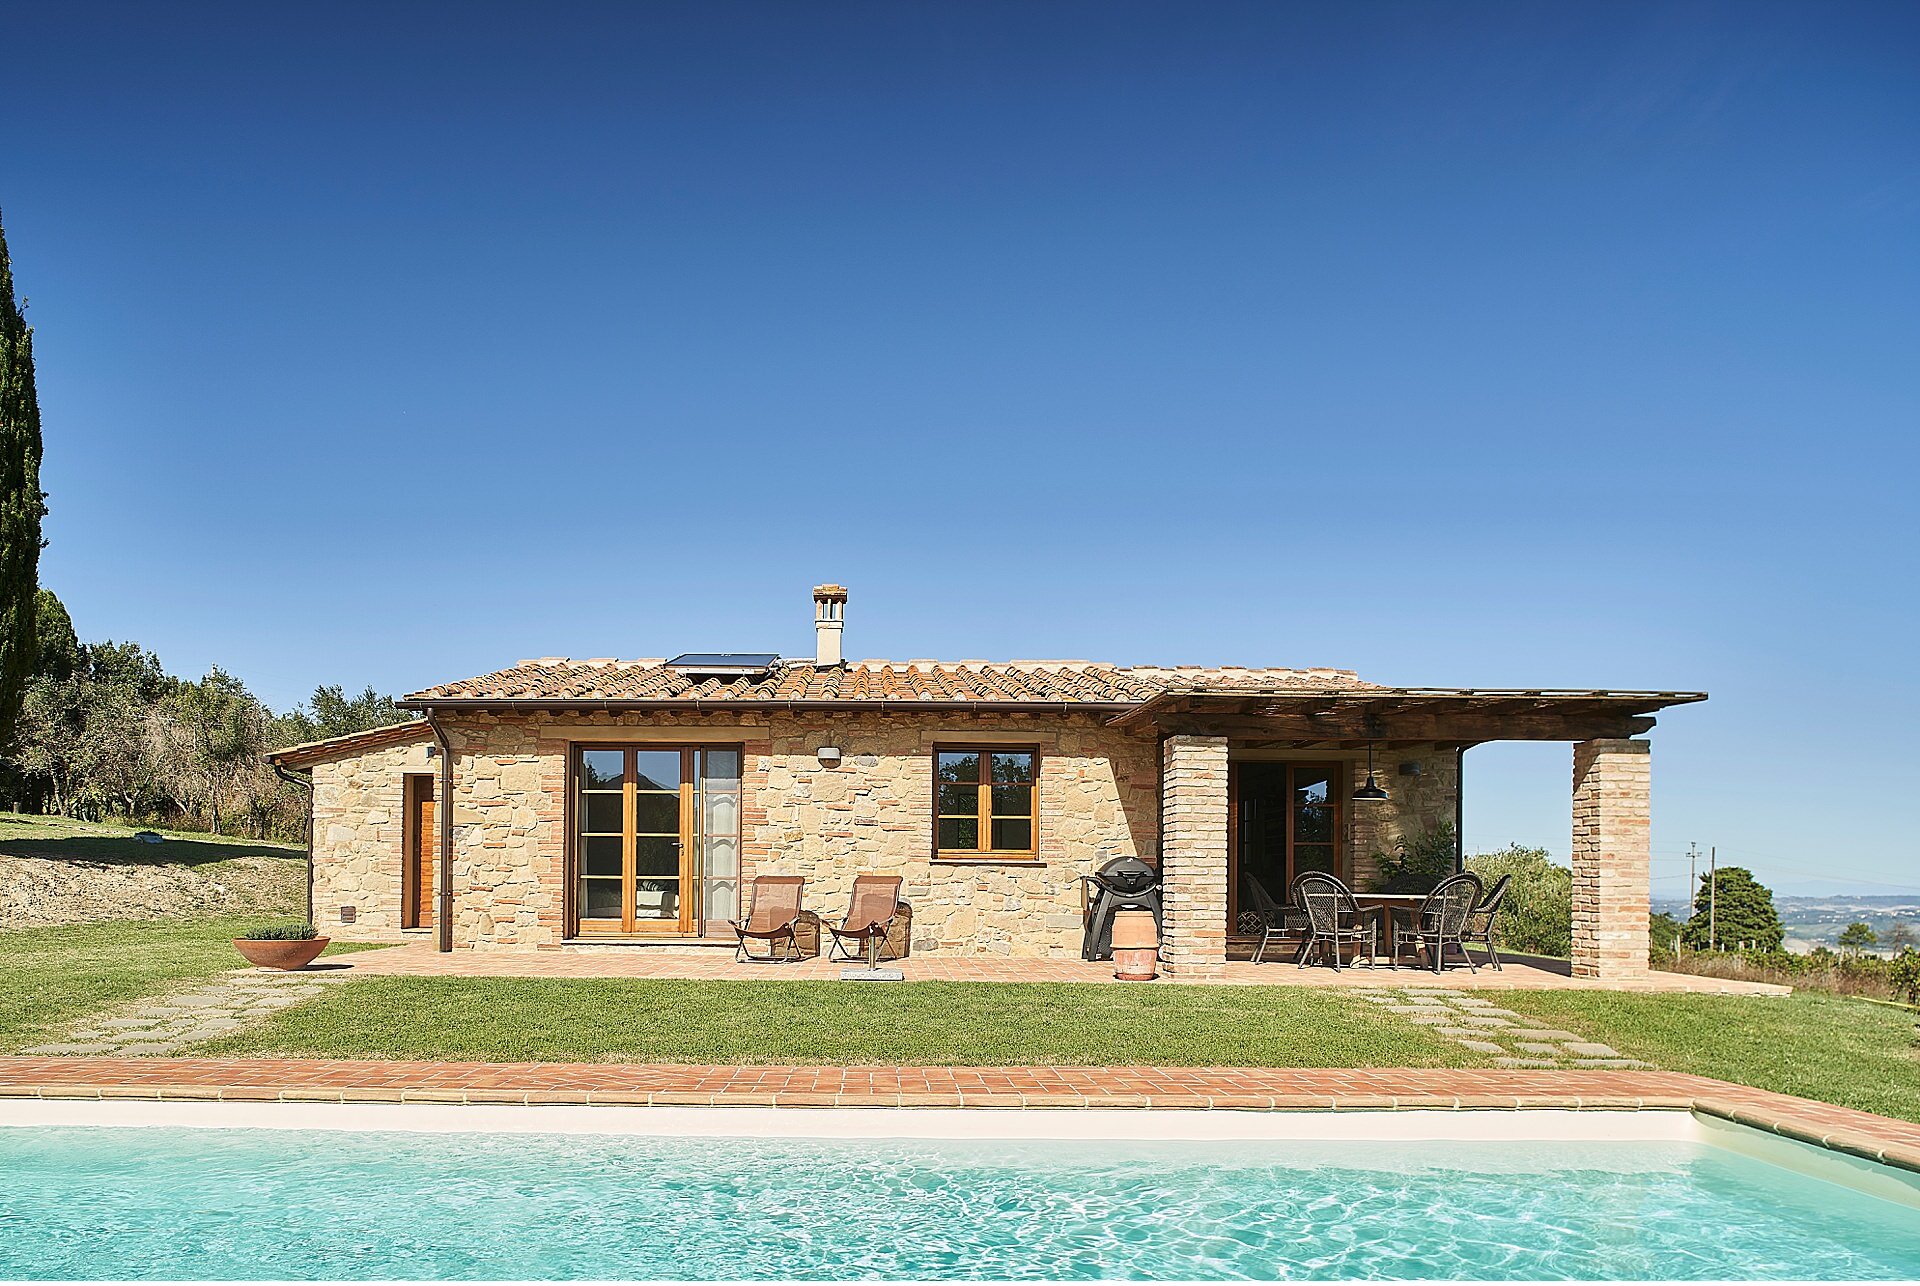  Charming cottage in Chianni, in Tuscany, behind Volterra, between Pisa, Florence and Siena. A landscape immersed in the clay for this holiday cottage surrounded by the woods. The property has renovated an old structure maintaining the Tuscan style w